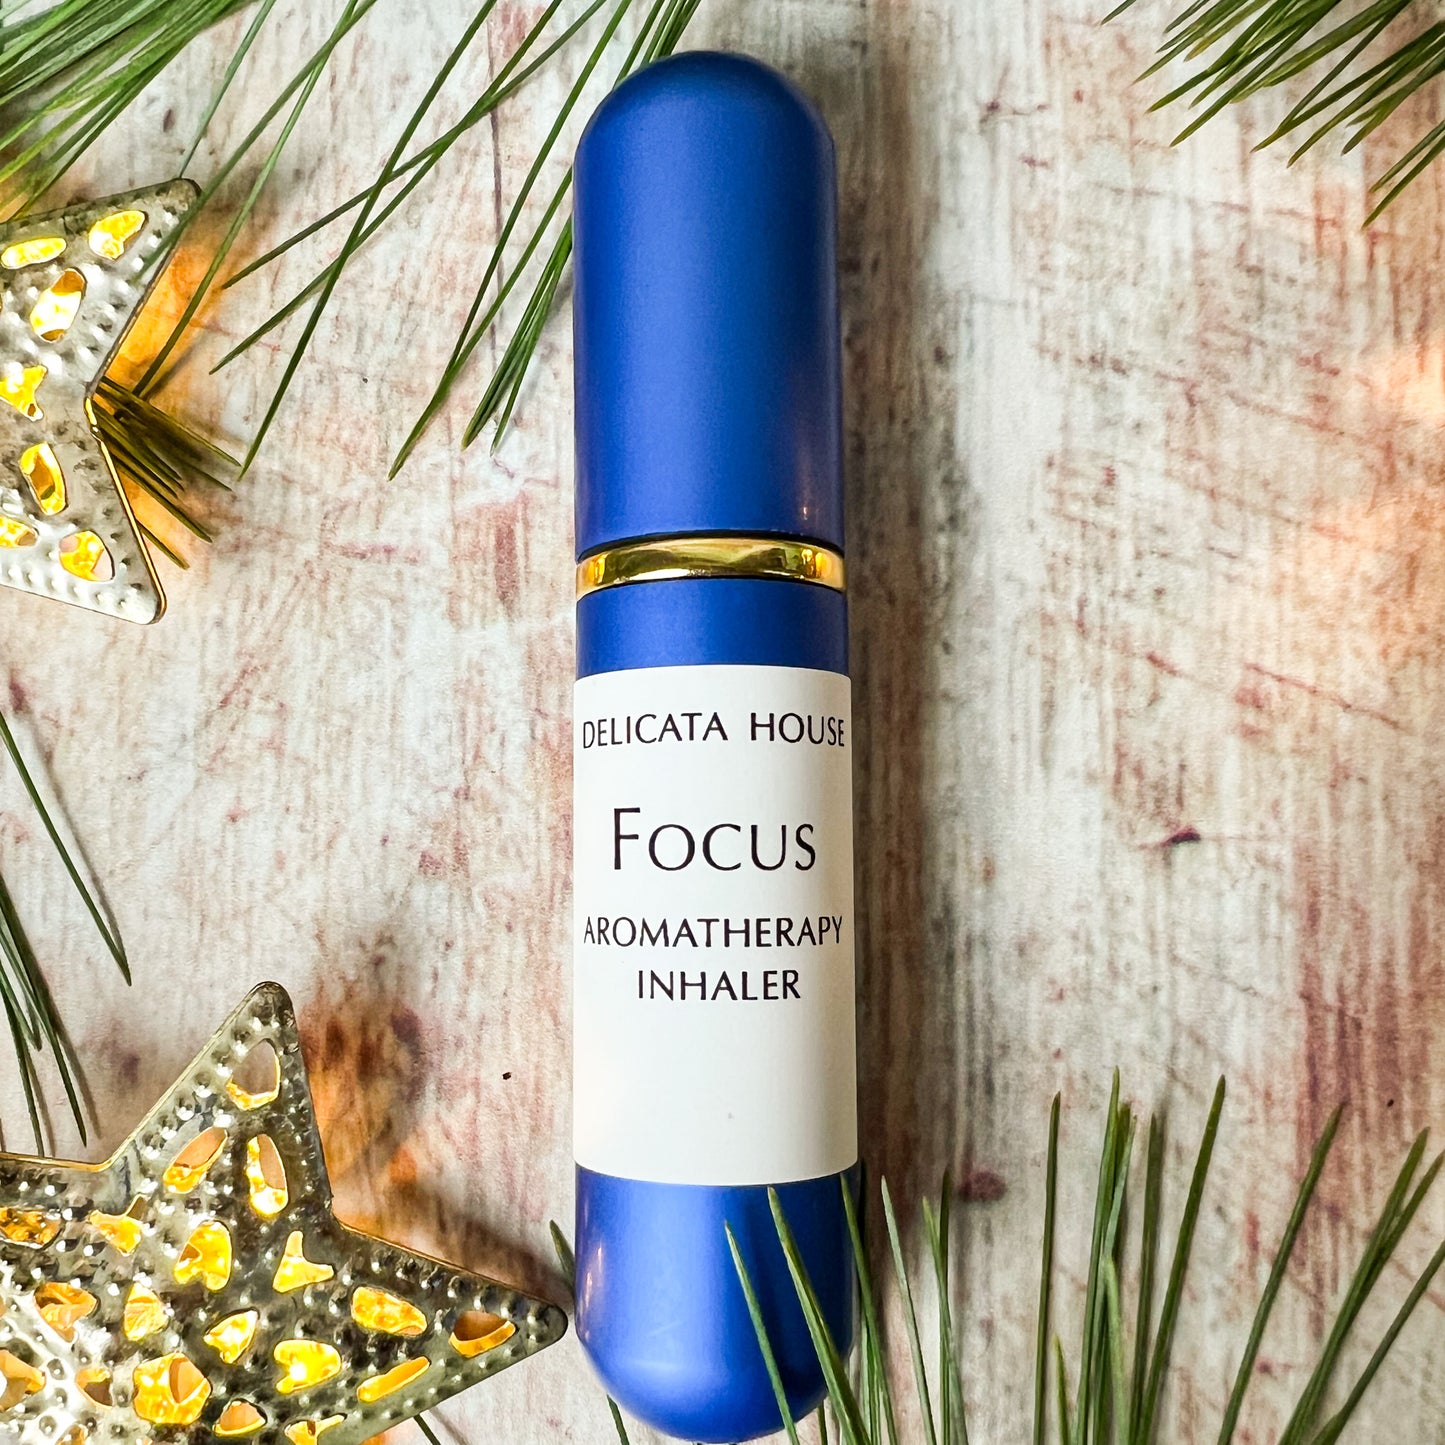 Focus Aromatherapy Nasal Inhaler - Aromatherapy for Focus and Mental Clarity